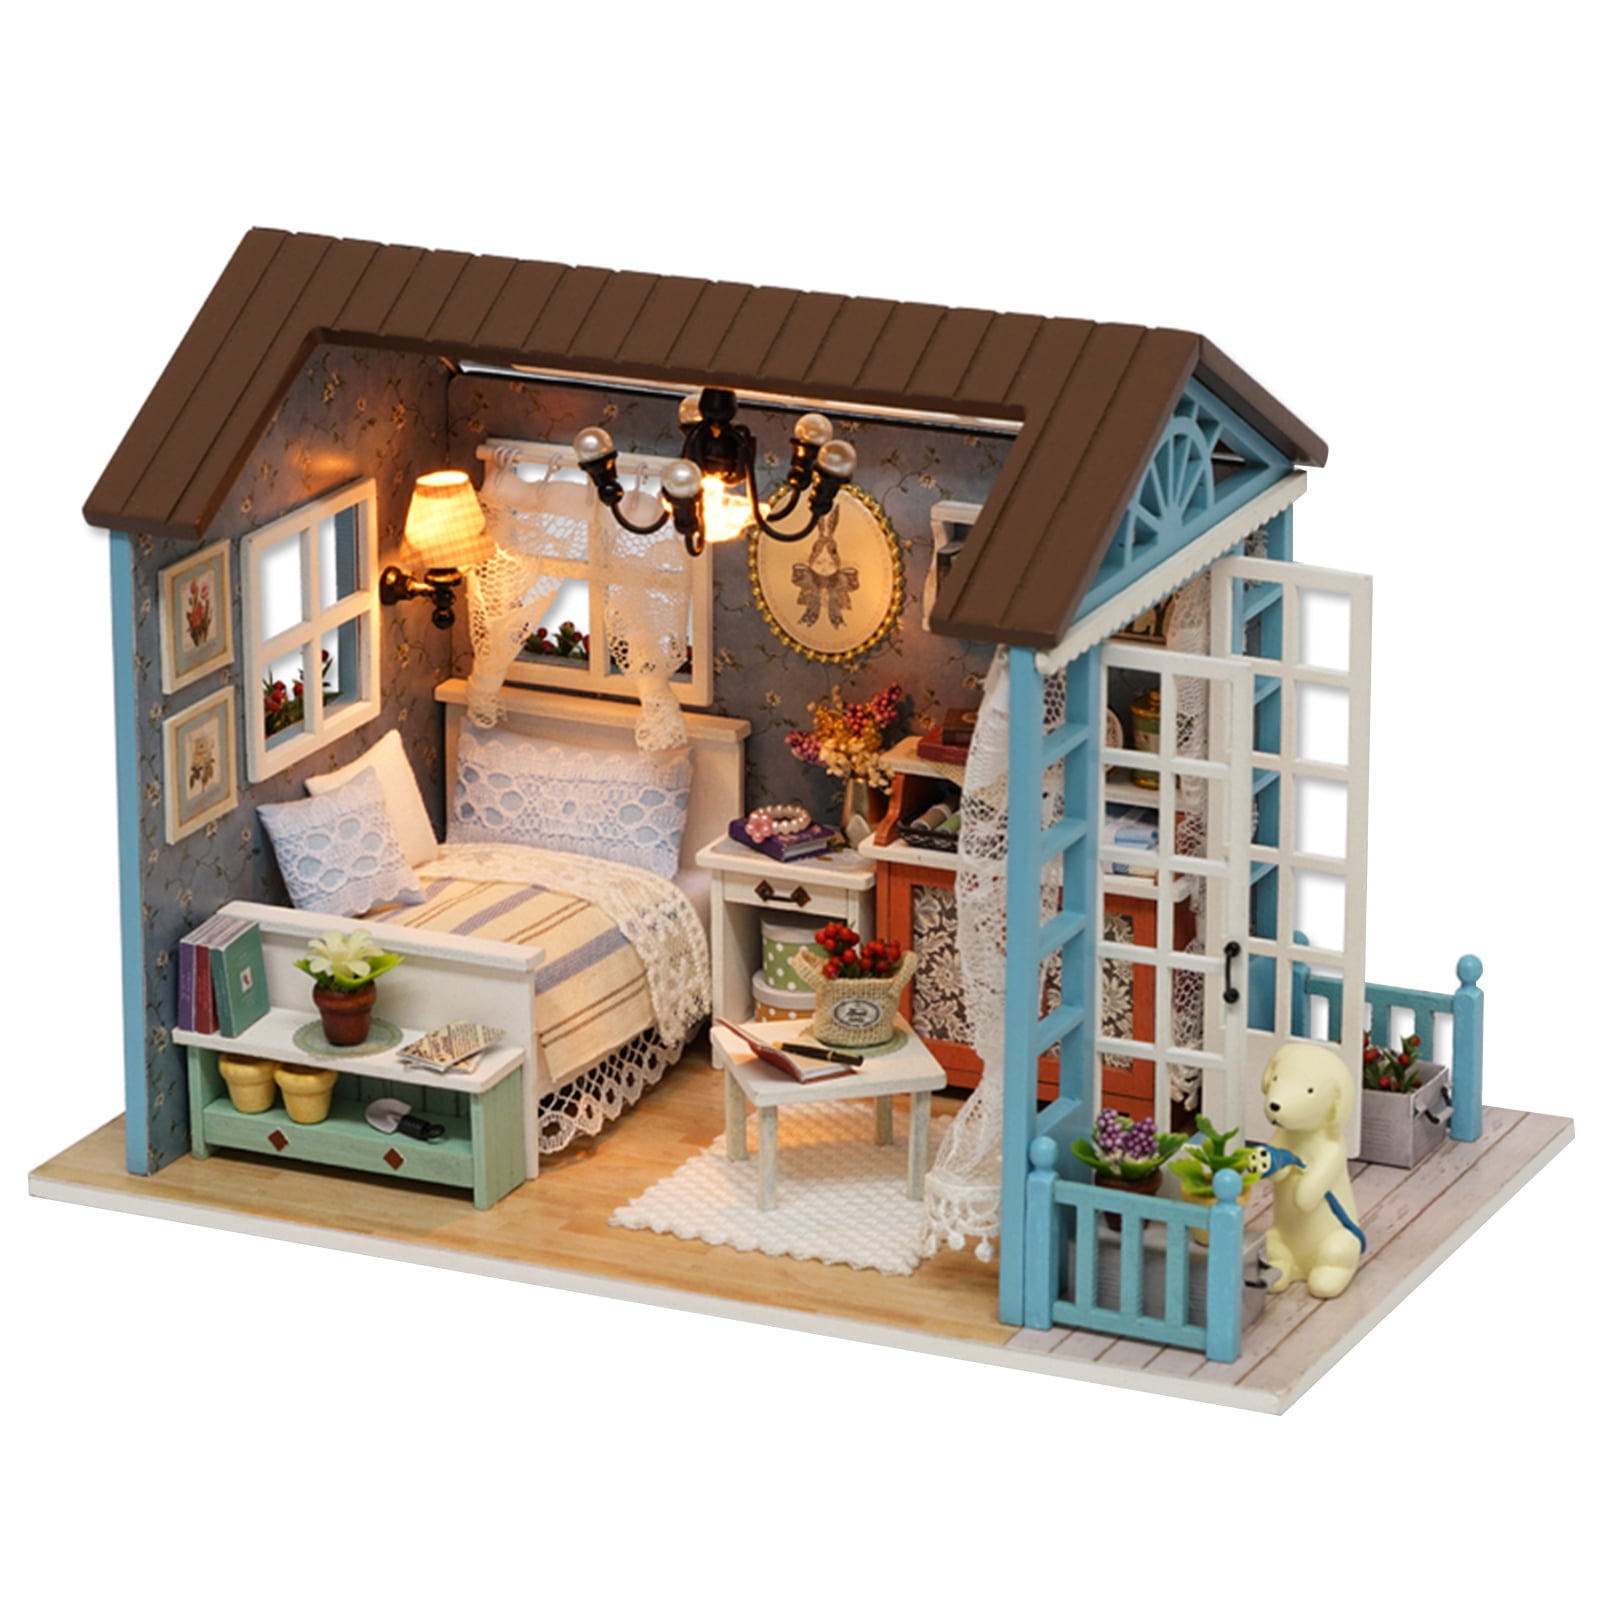 DIY Miniature Dollhouse Kit Mini 3D Wooden House Room Craft with LED Light Gift 